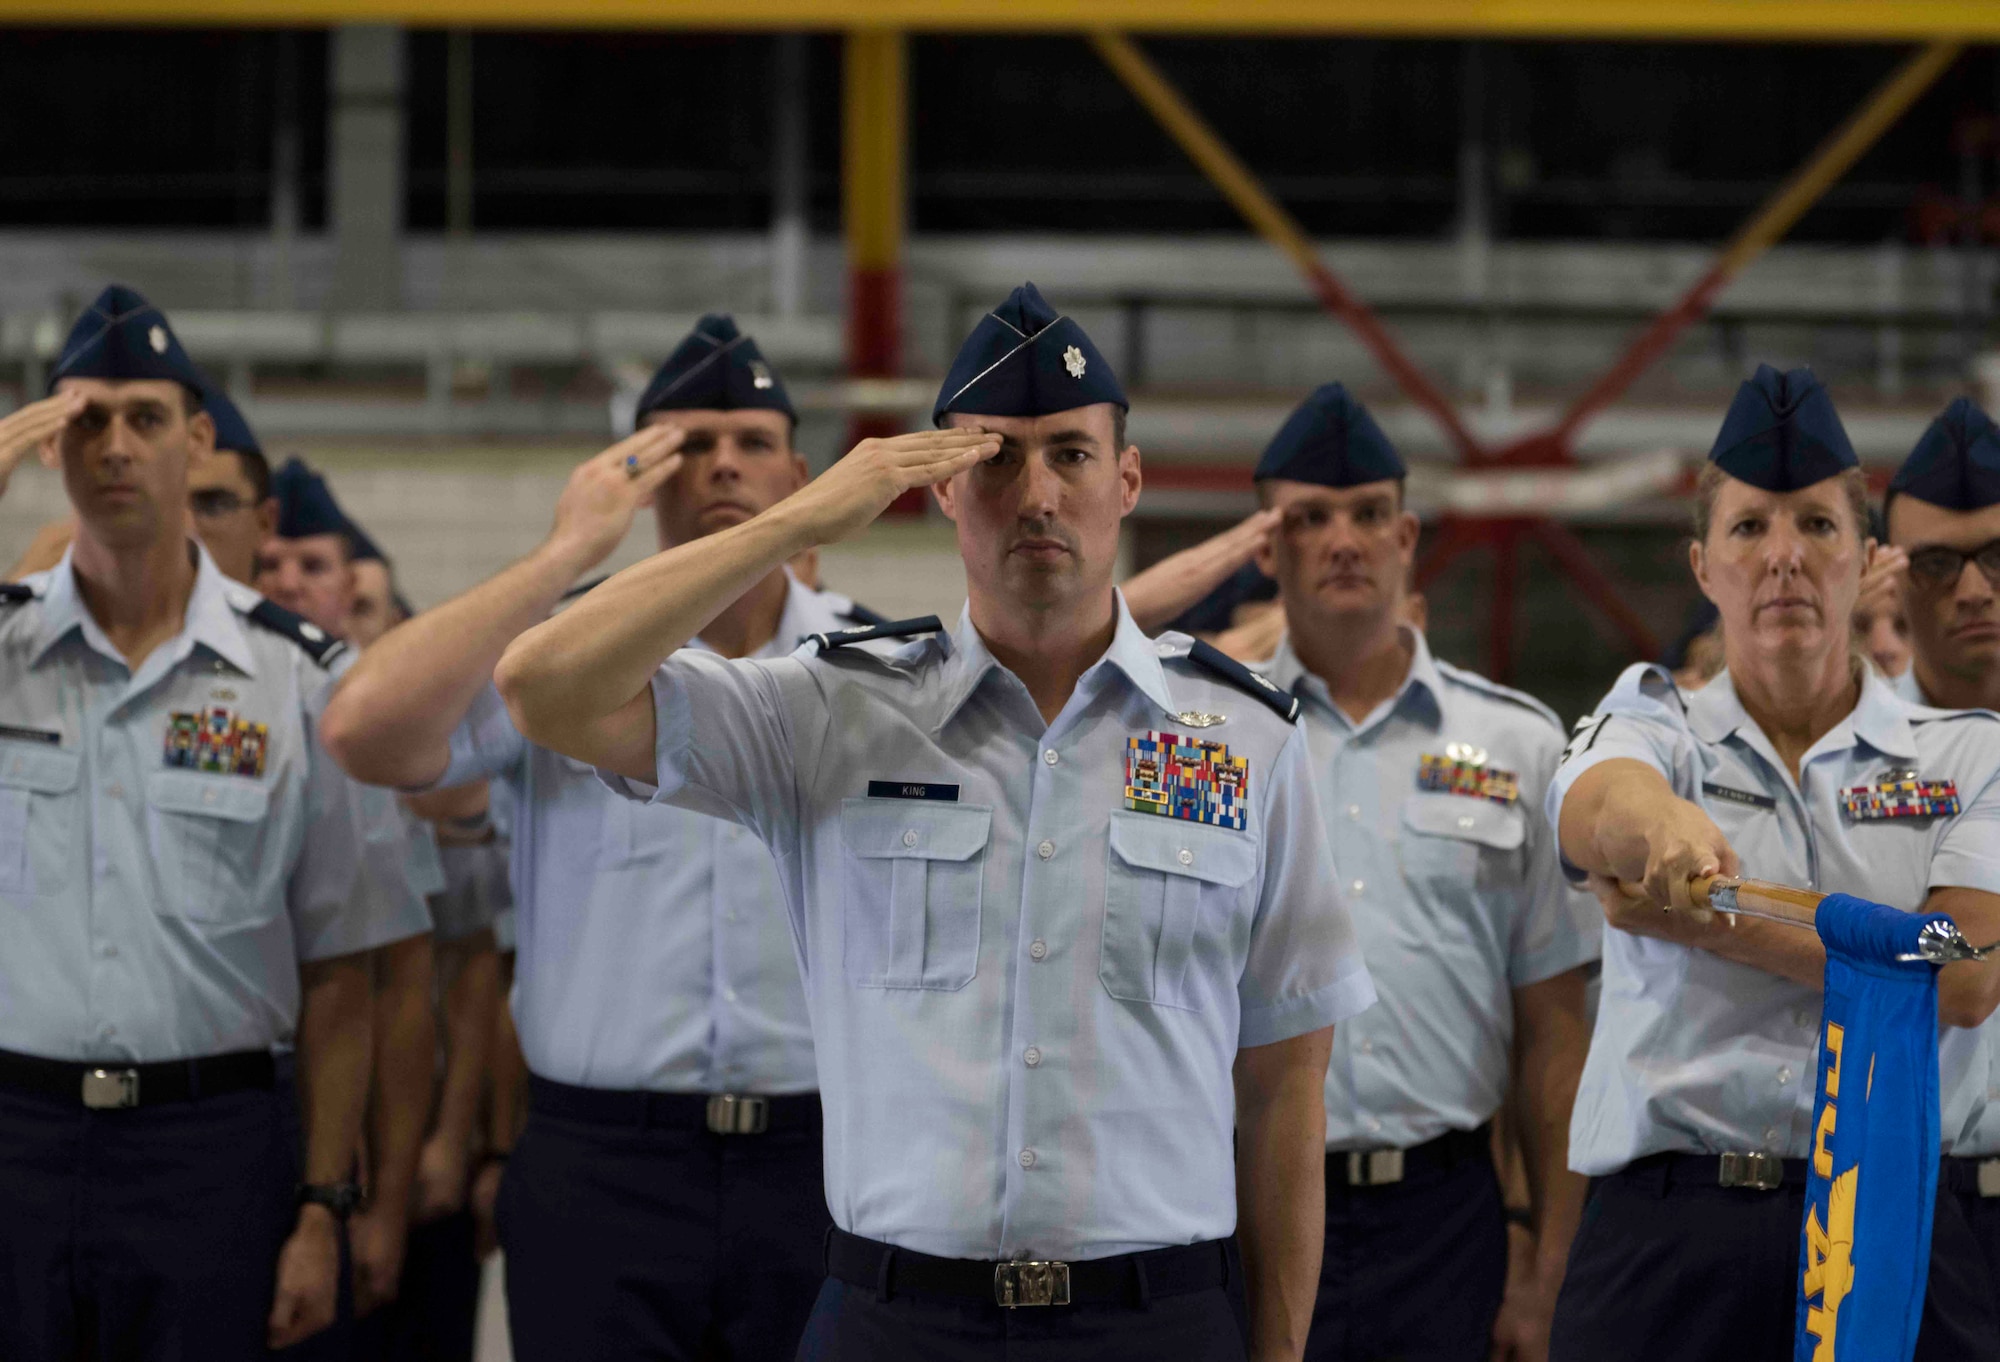 Members of a formation salute as the national anthem plays during Air Mobility Command change of command, Scott Air Force Base, Illinois, Sept. 7, 2018. Gen. Maryanne Miller assumed command from Everhart, who retires after 35 years of service to the Air Force. AMC provides rapid, global mobility and sustainment for America's armed forces through airlift, aerial refueling, aeromedical evacuation and mobility support. (U.S. Air Force photo by Tech. Sgt. Jodi Martinez)